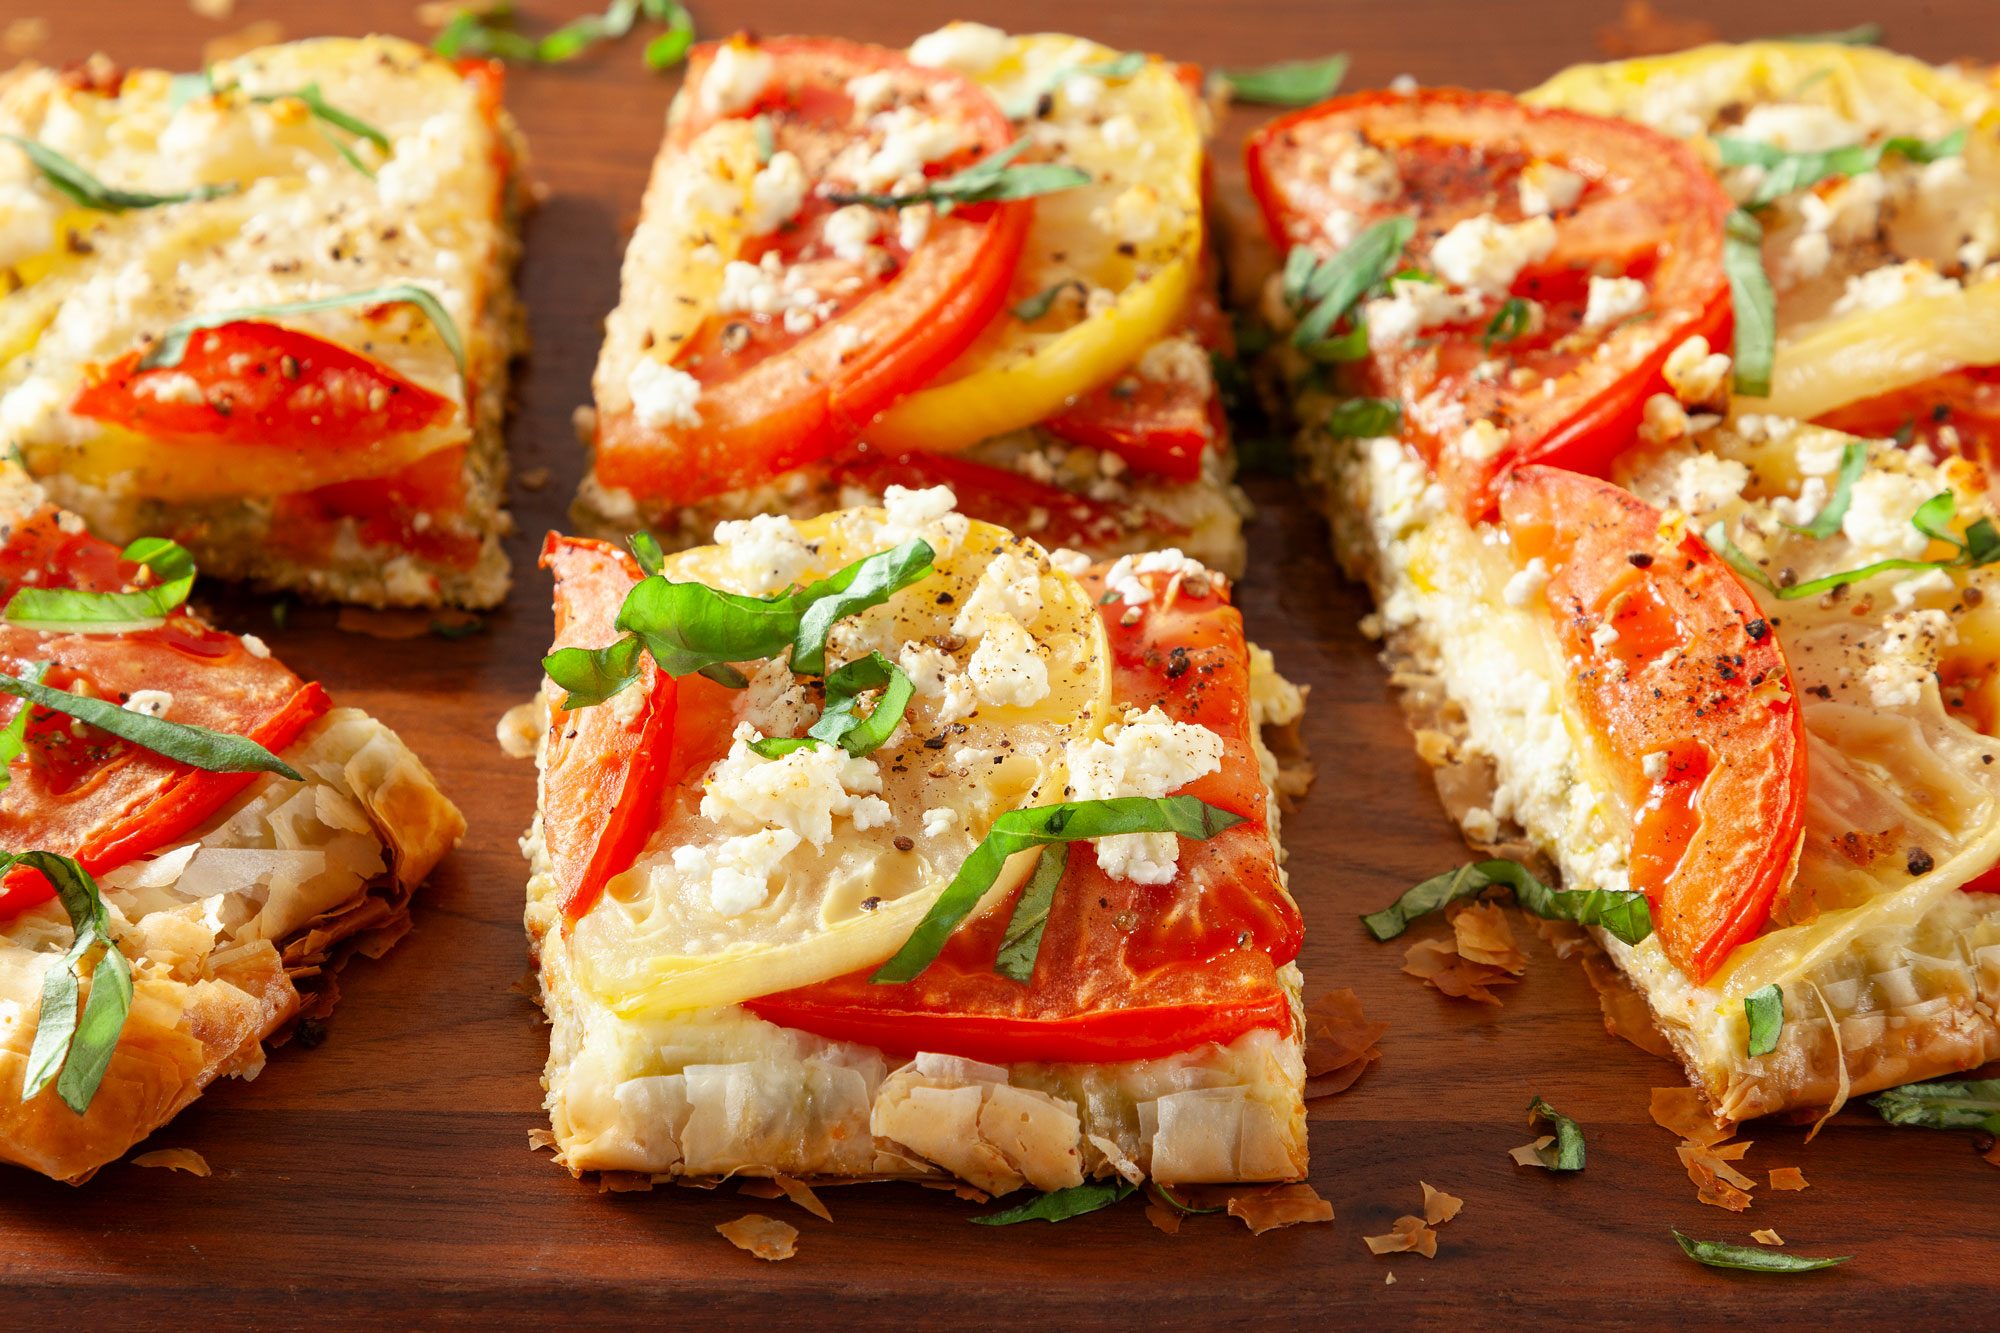 Tomato Tart sliced and ready to eat